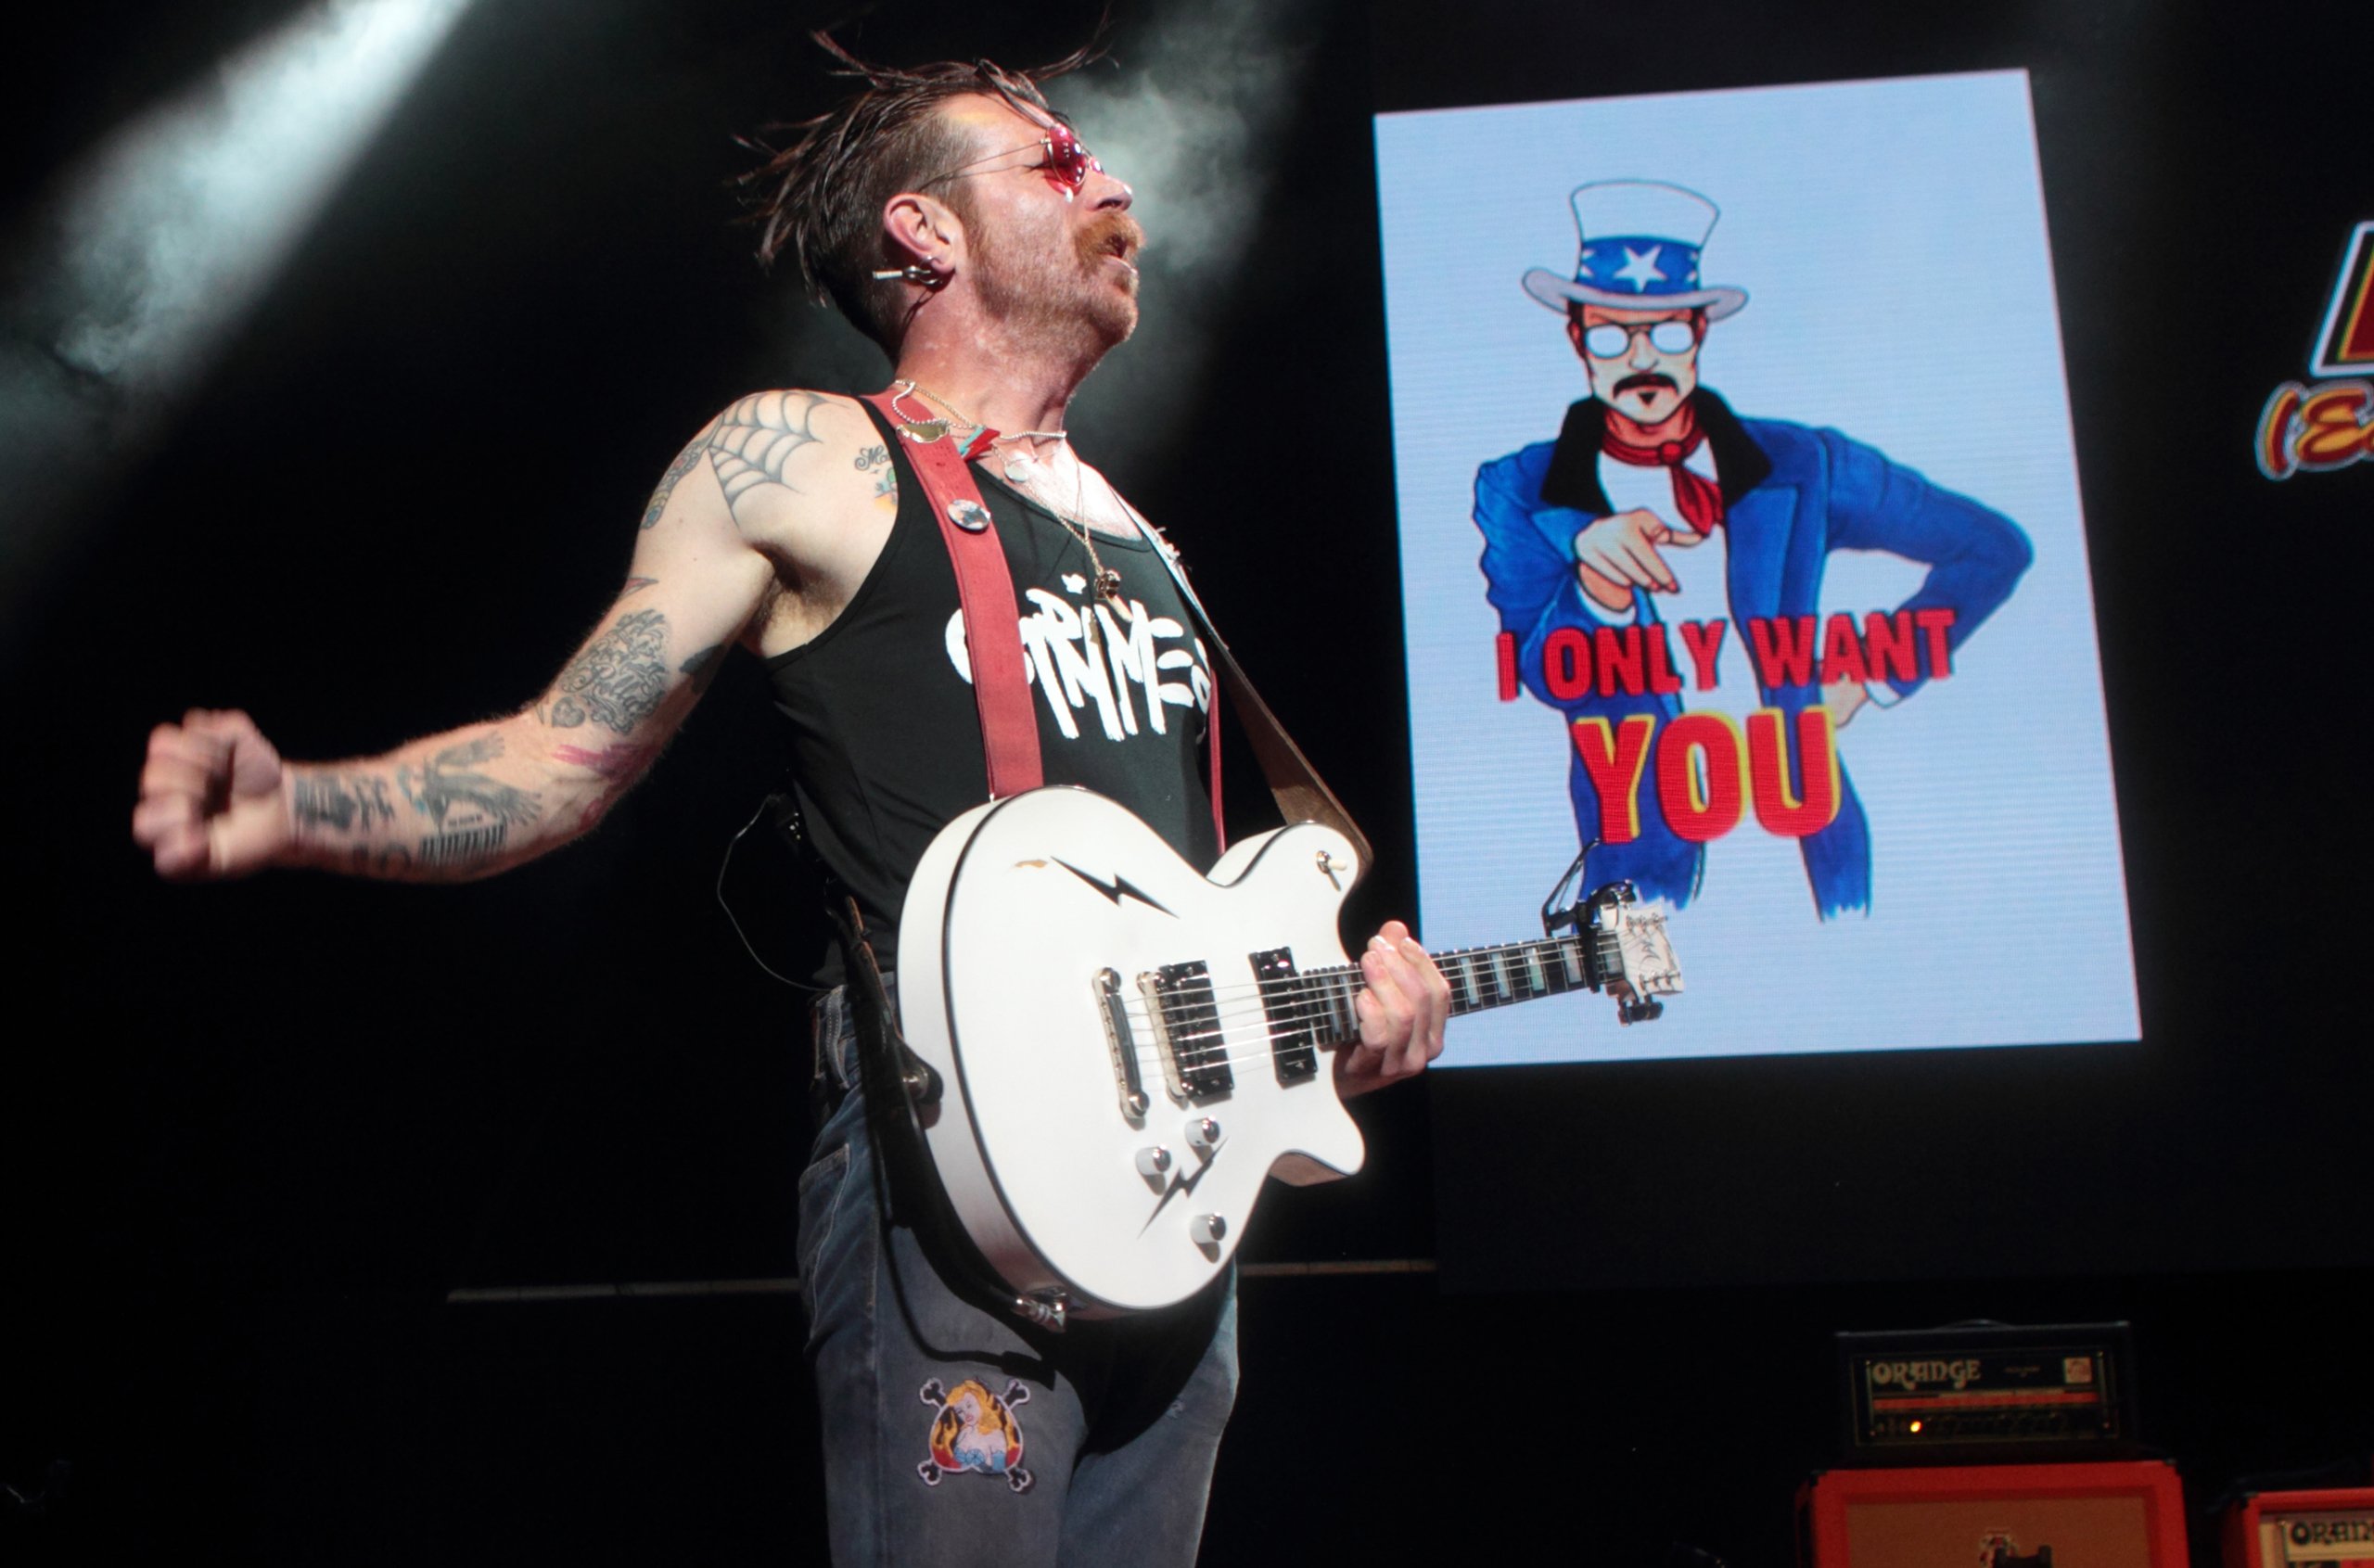 Jesse Hughes of Eagles of Death Metal performs during the Sweetlife Festival at Merriweather Post Pavilion on Saturday, May 14, 2016, in Columbia, Md. (Photo by Owen Sweeney/Invision/AP)